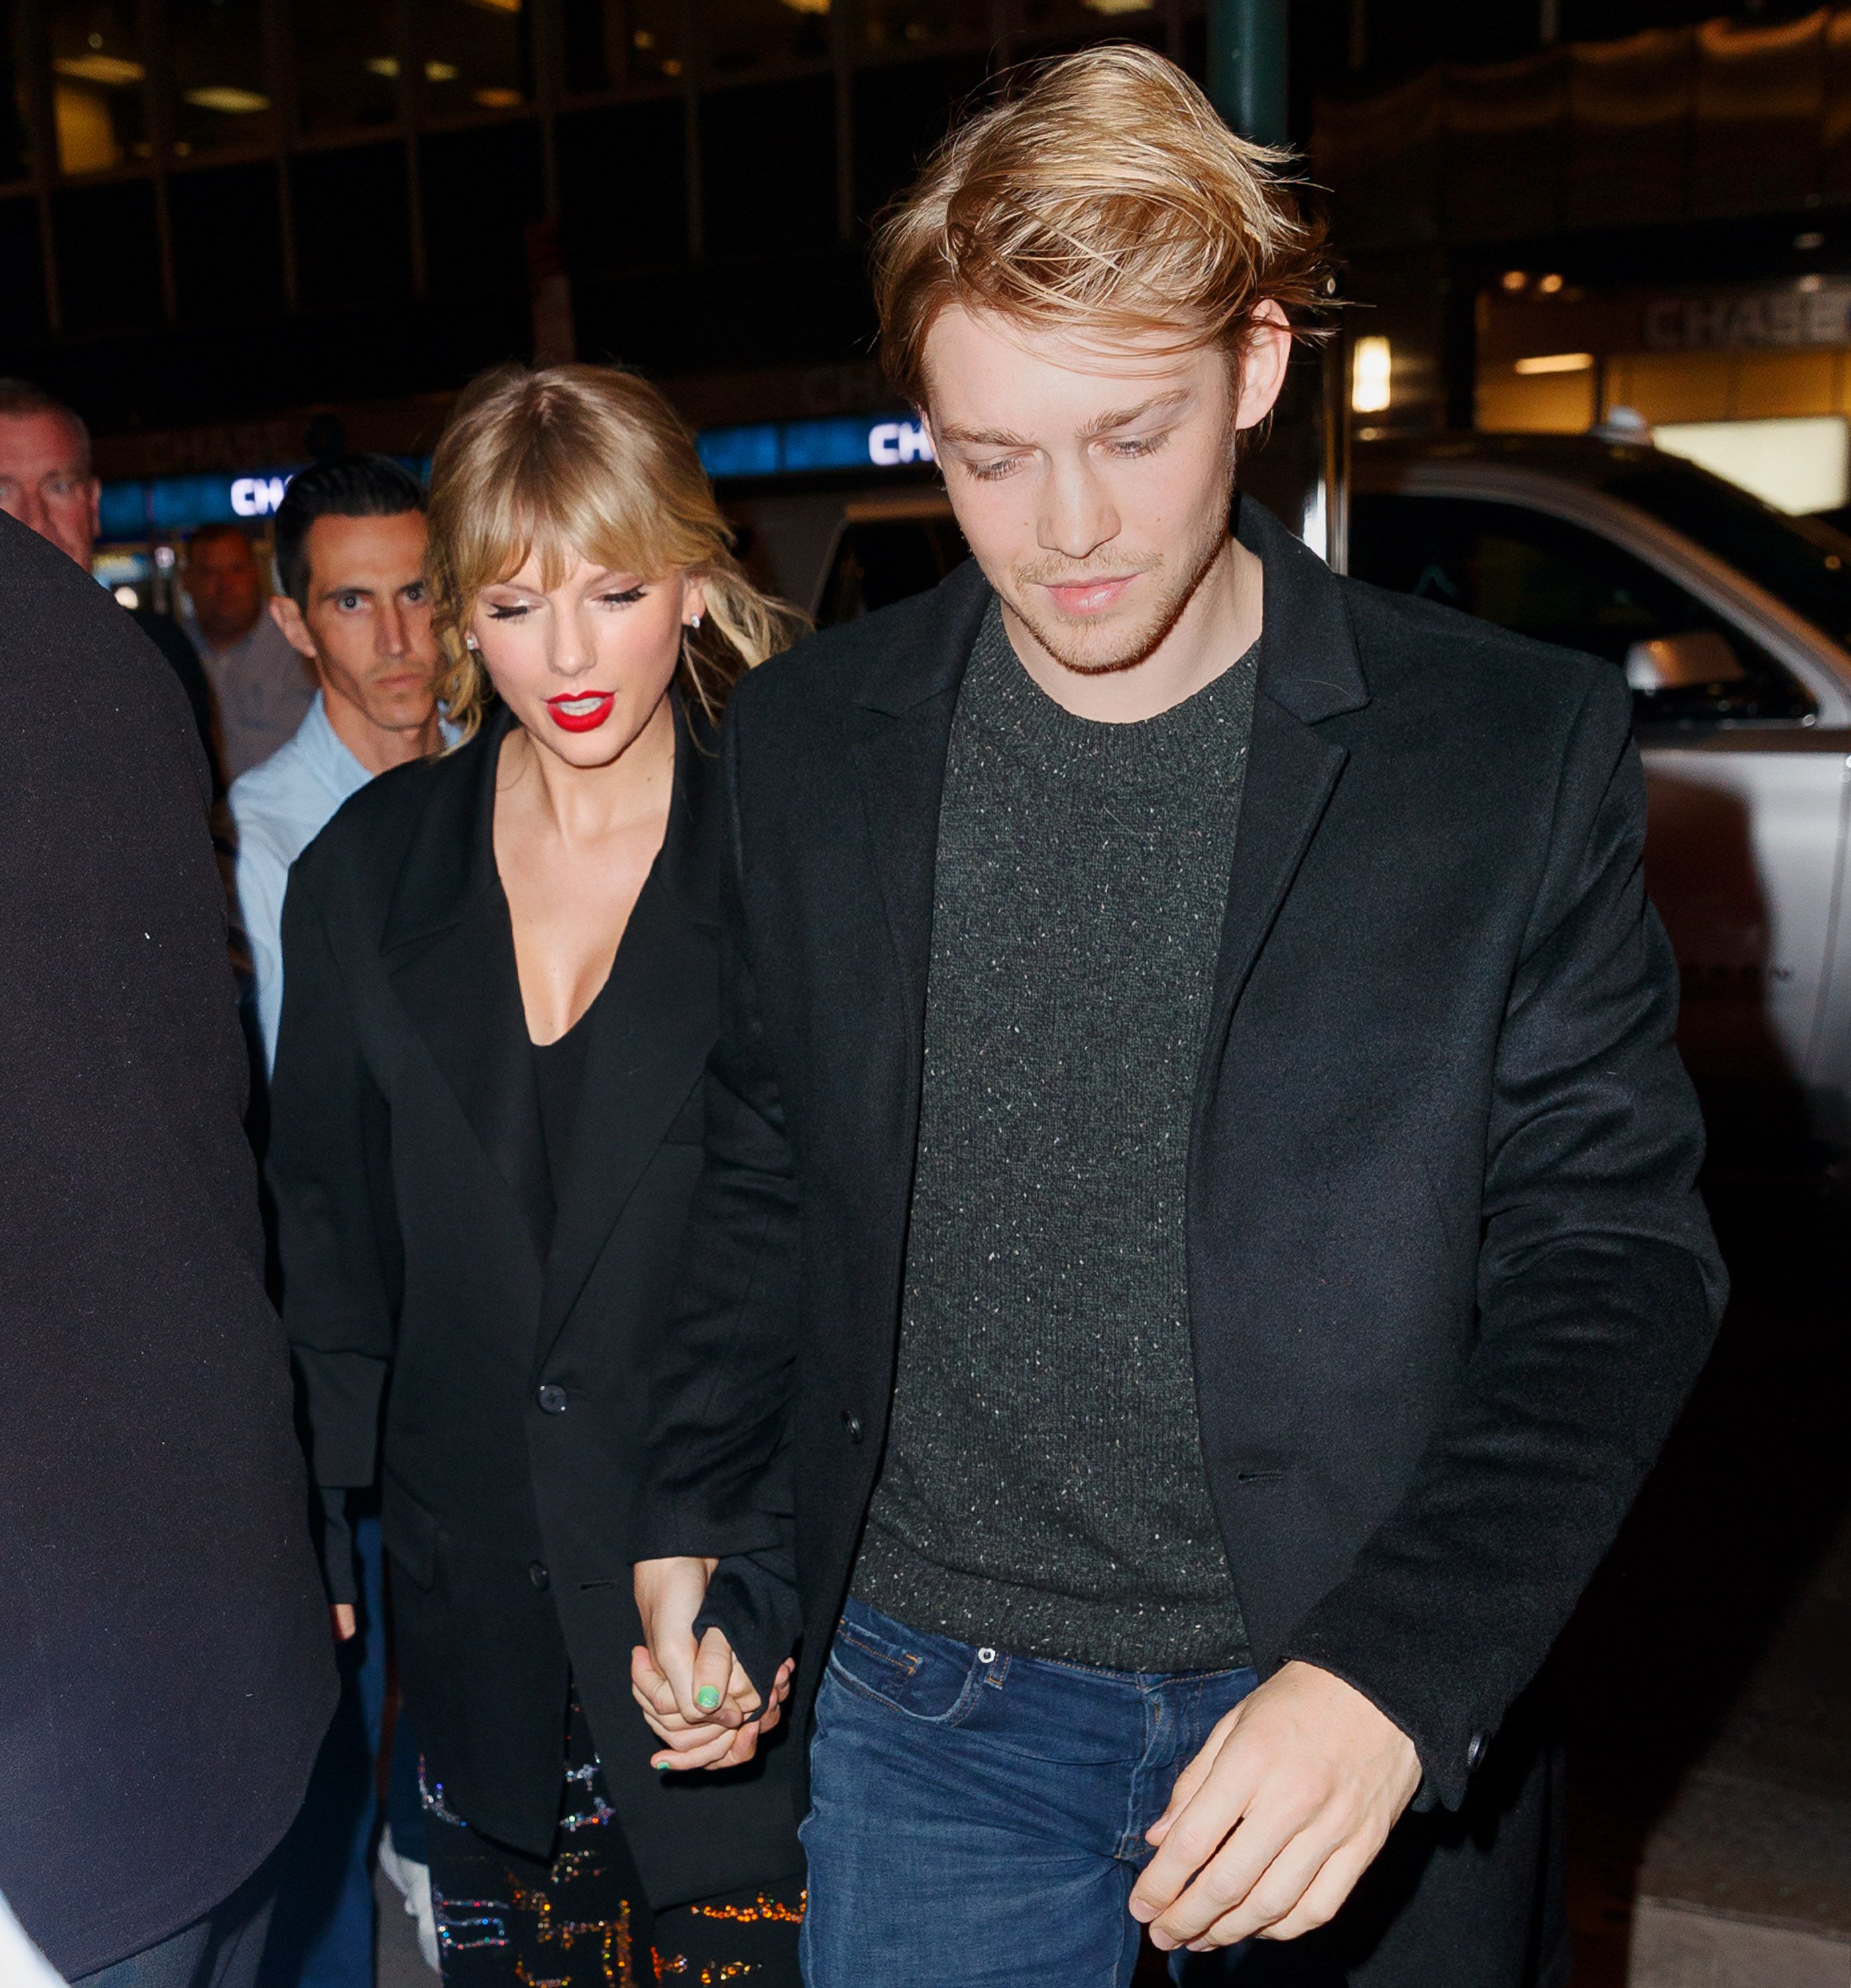 Taylor Swift: Has her new boyfriend shown she's changed her type?